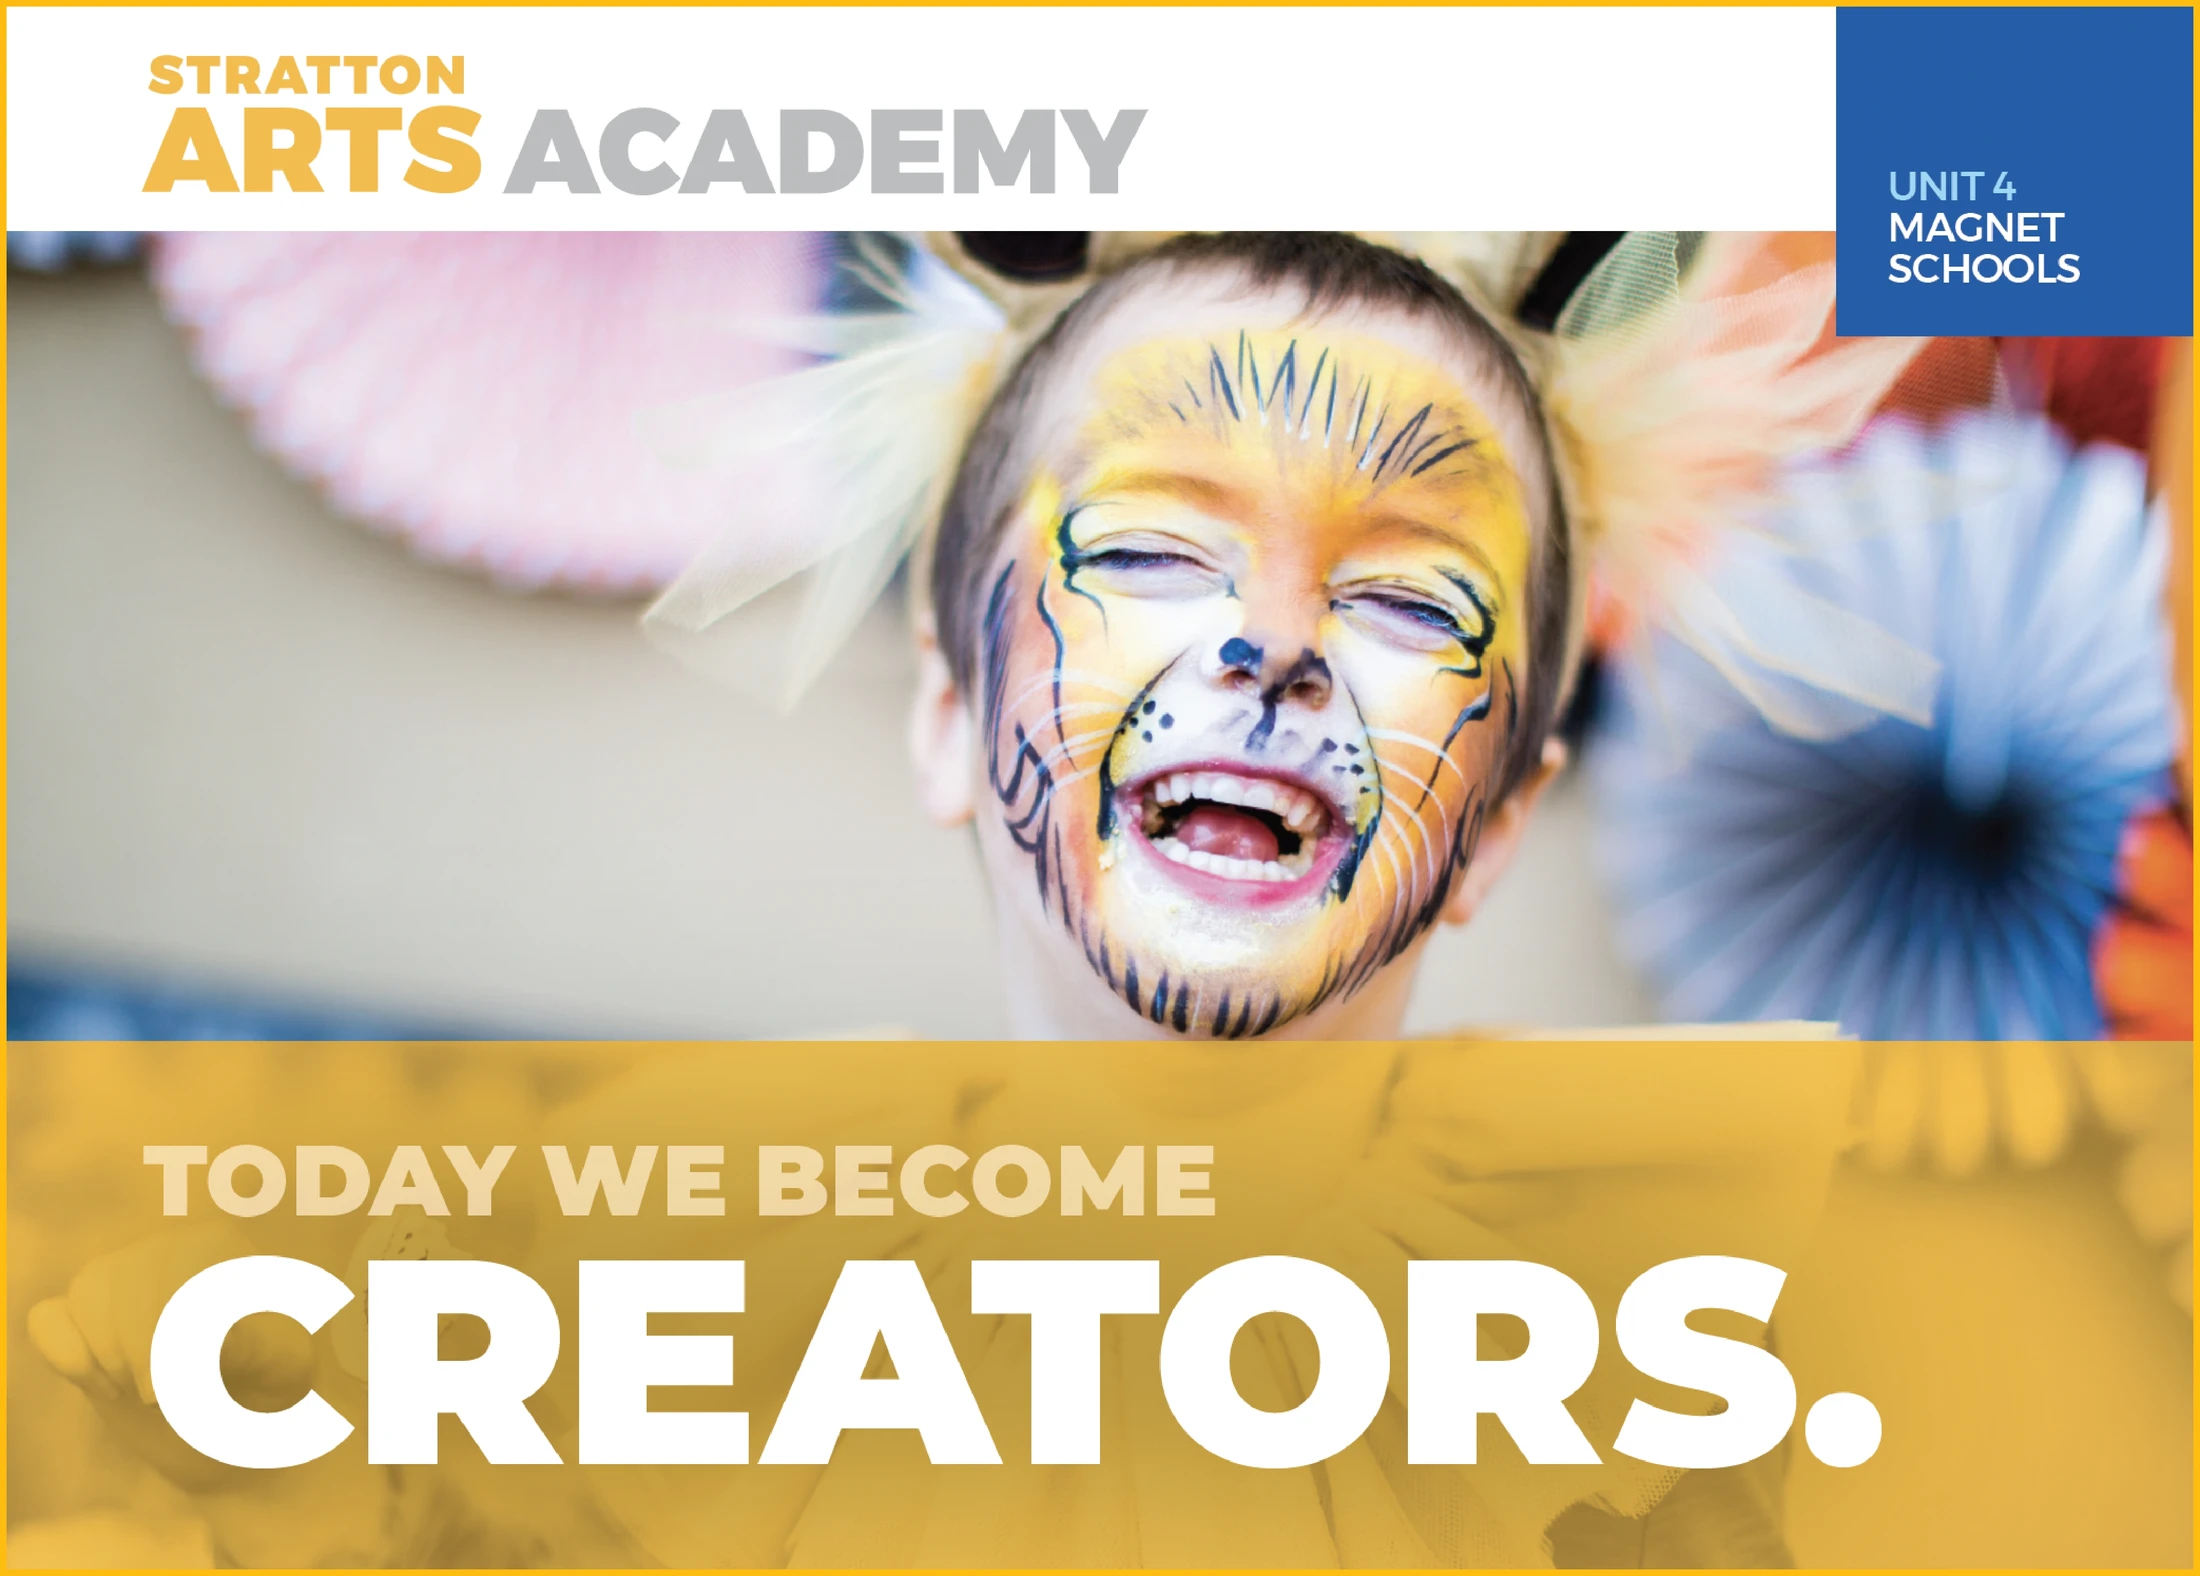 Stratton arts academy today we become creators.